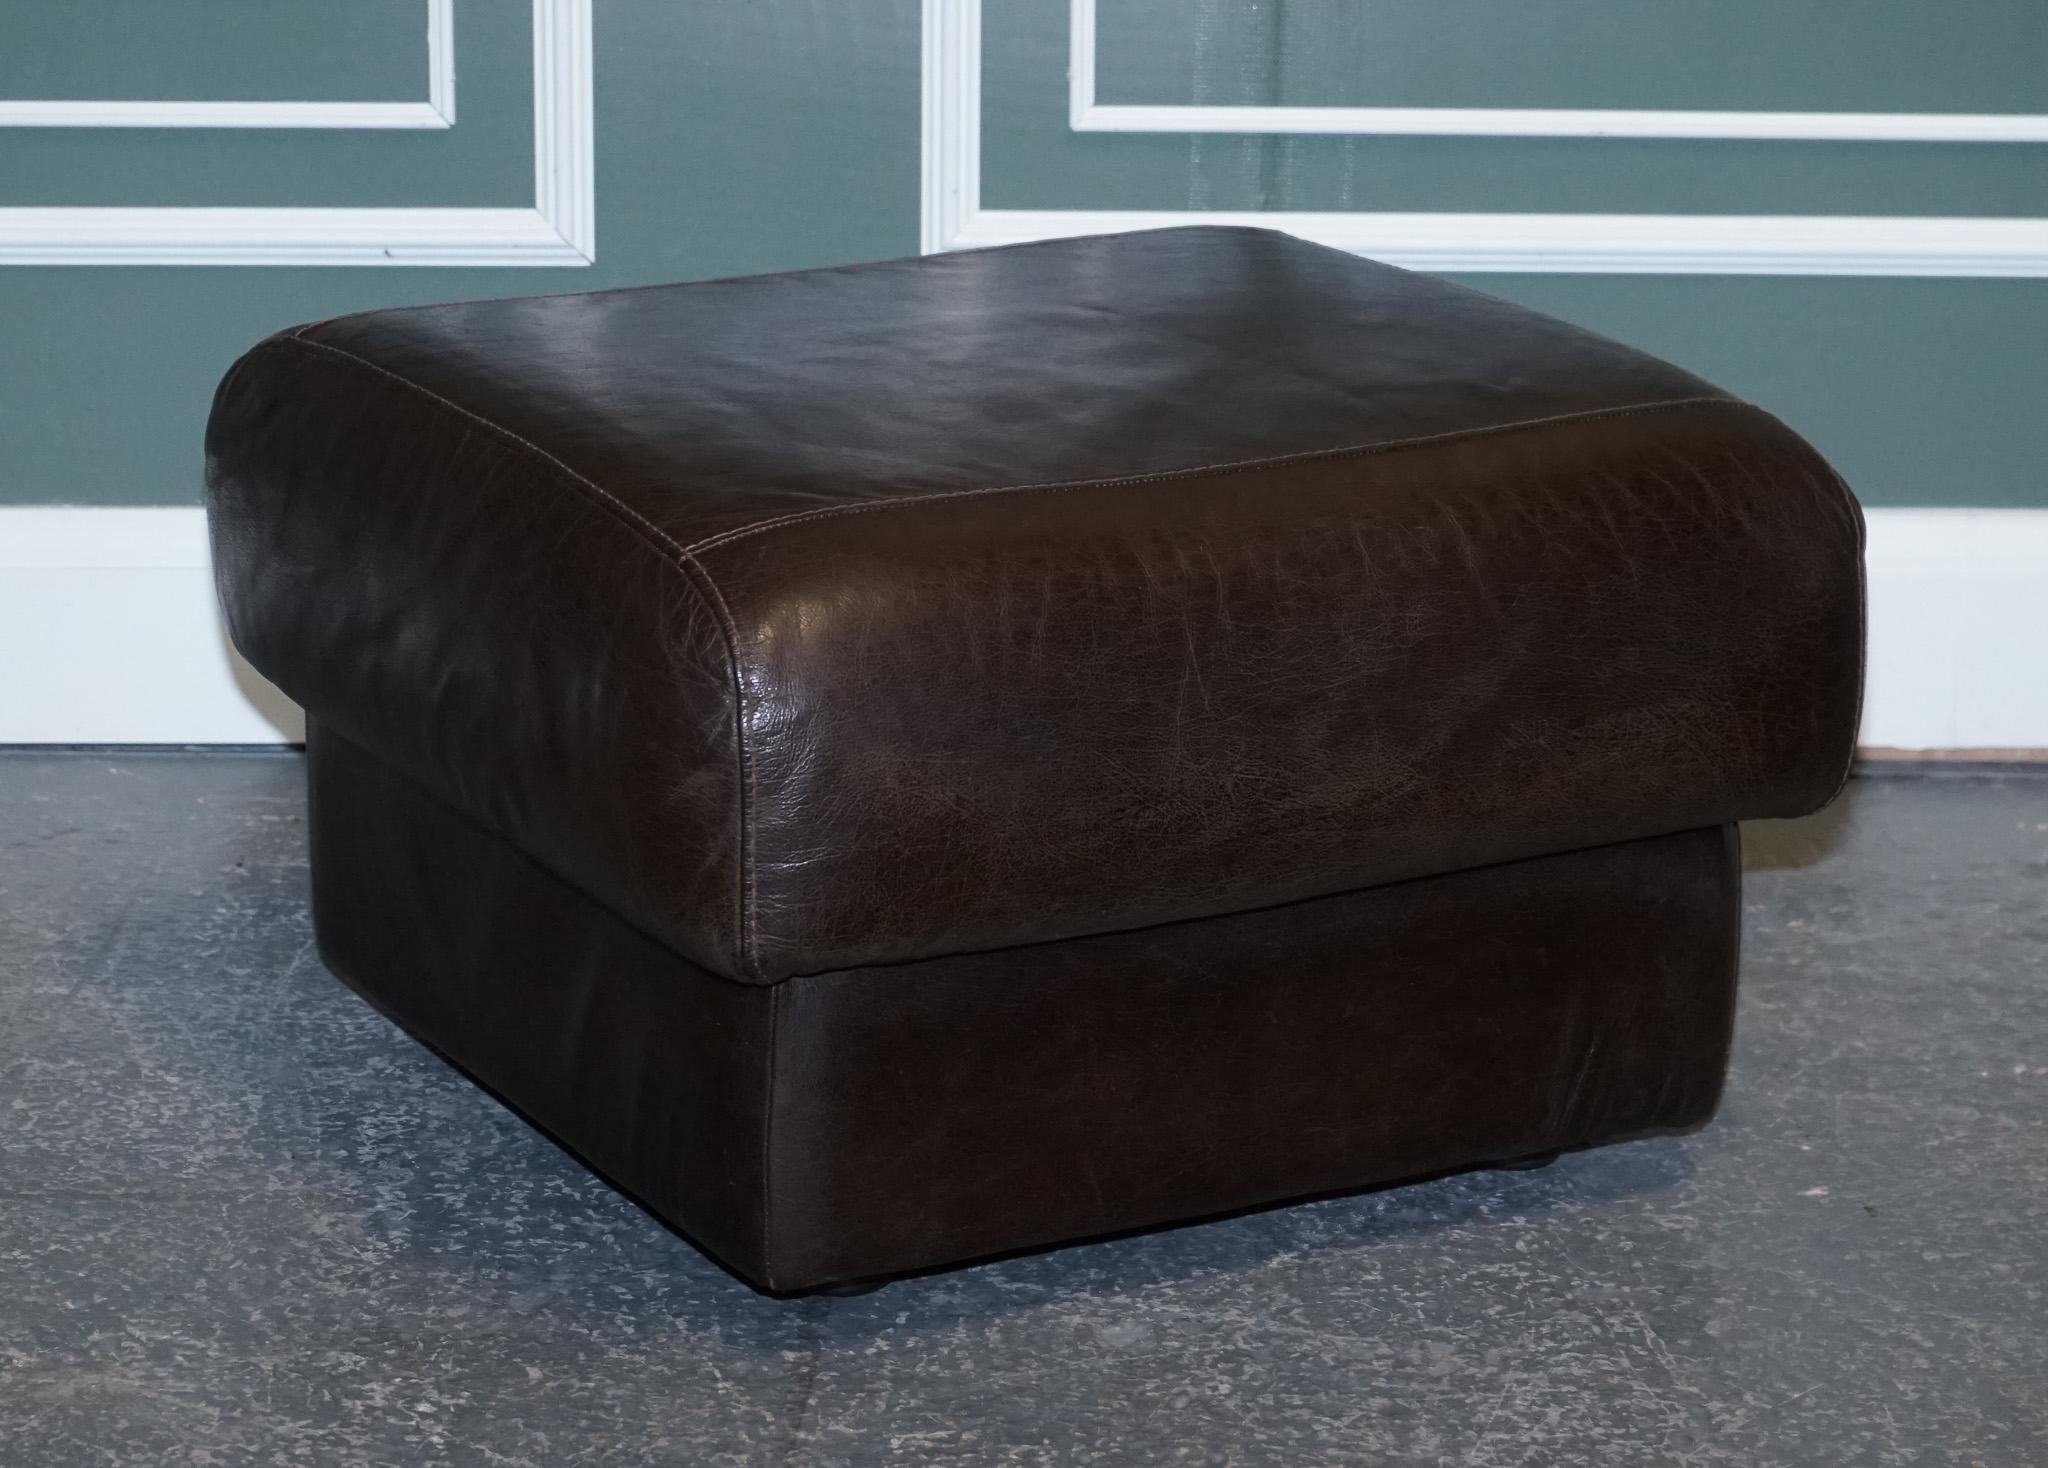 
We are excited to present this vintage chocolate brown leather footstool.

We have a matching two-seater, three-seater and a pair of armchairs available on our other listings.
If you're interested please feel free to send us a message.

We have